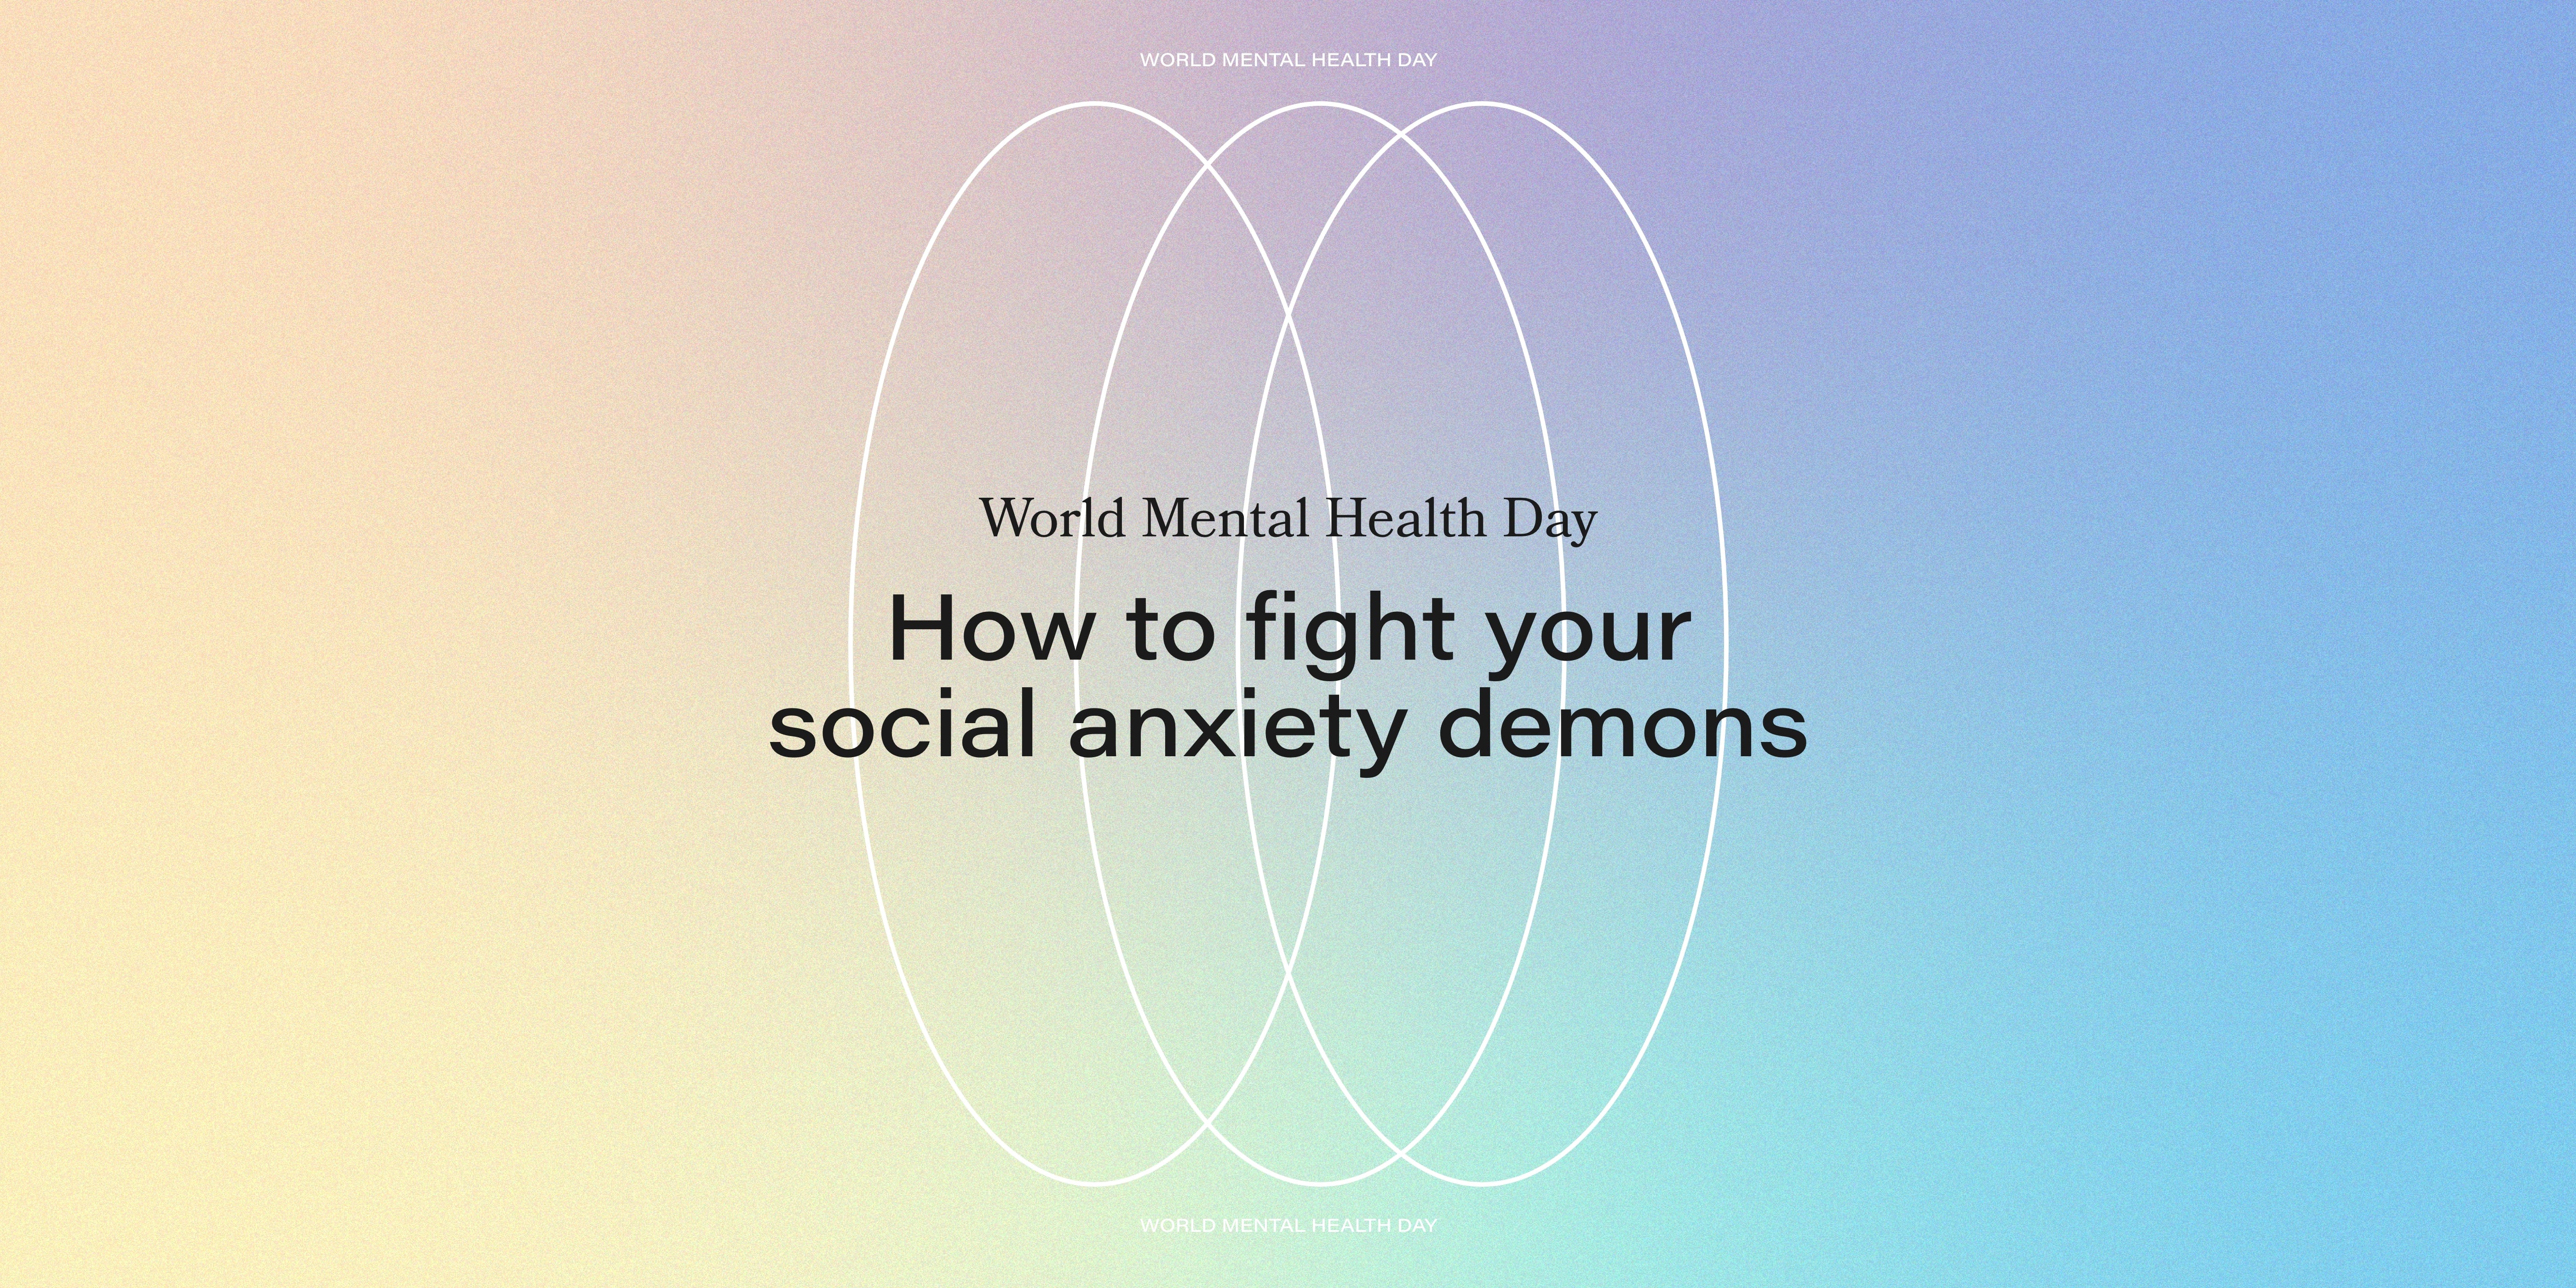 World Mental Health Day - How to fight your social anxiety demons